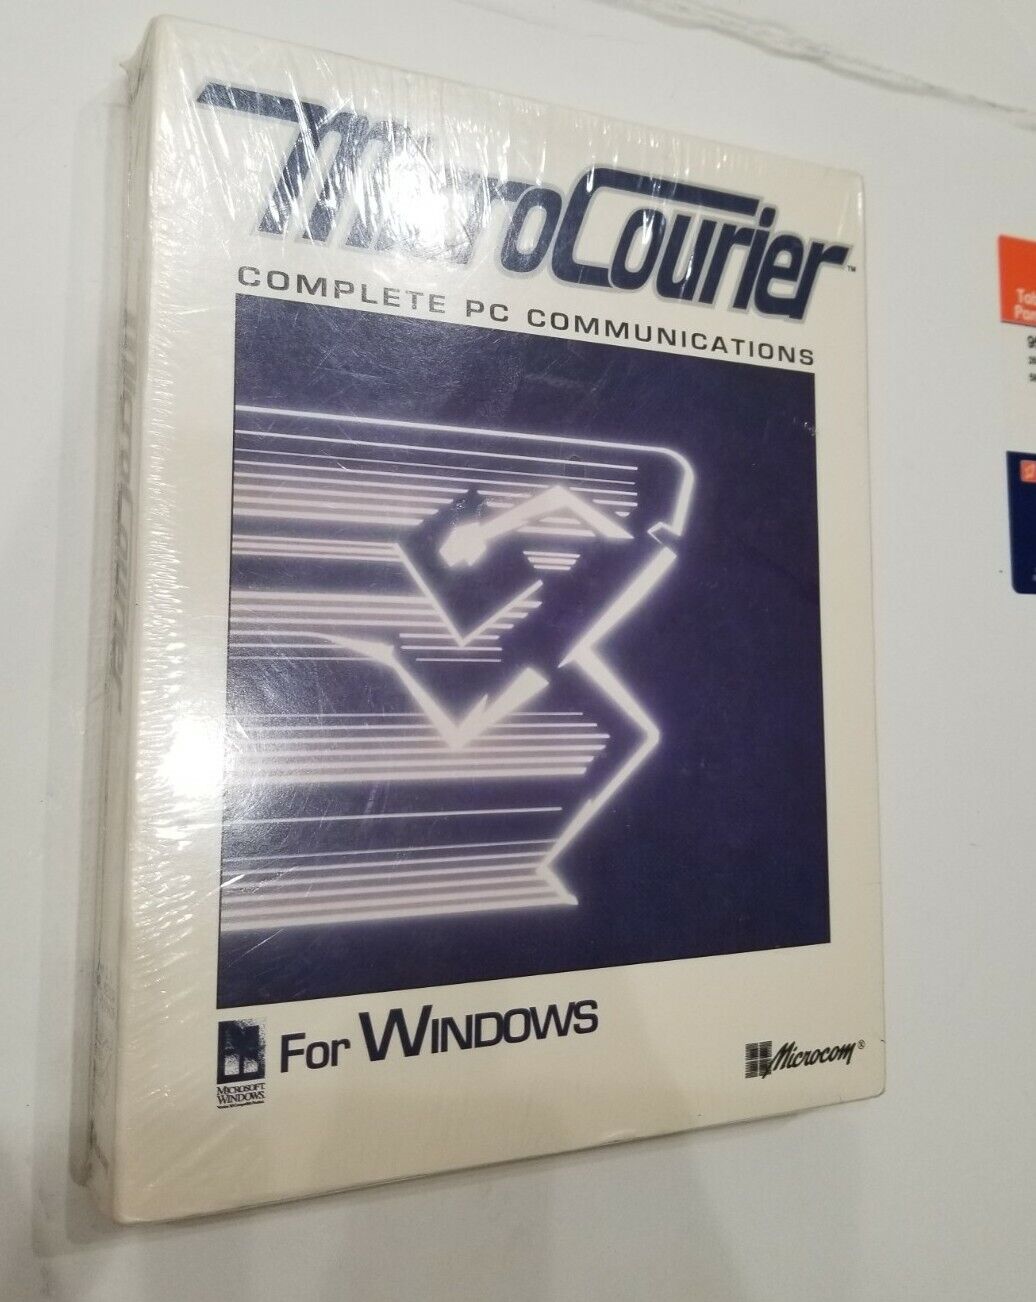 Rare New 1991 Micro Courier Microsoft Windows 1.0 PC Communications DOS Vintage